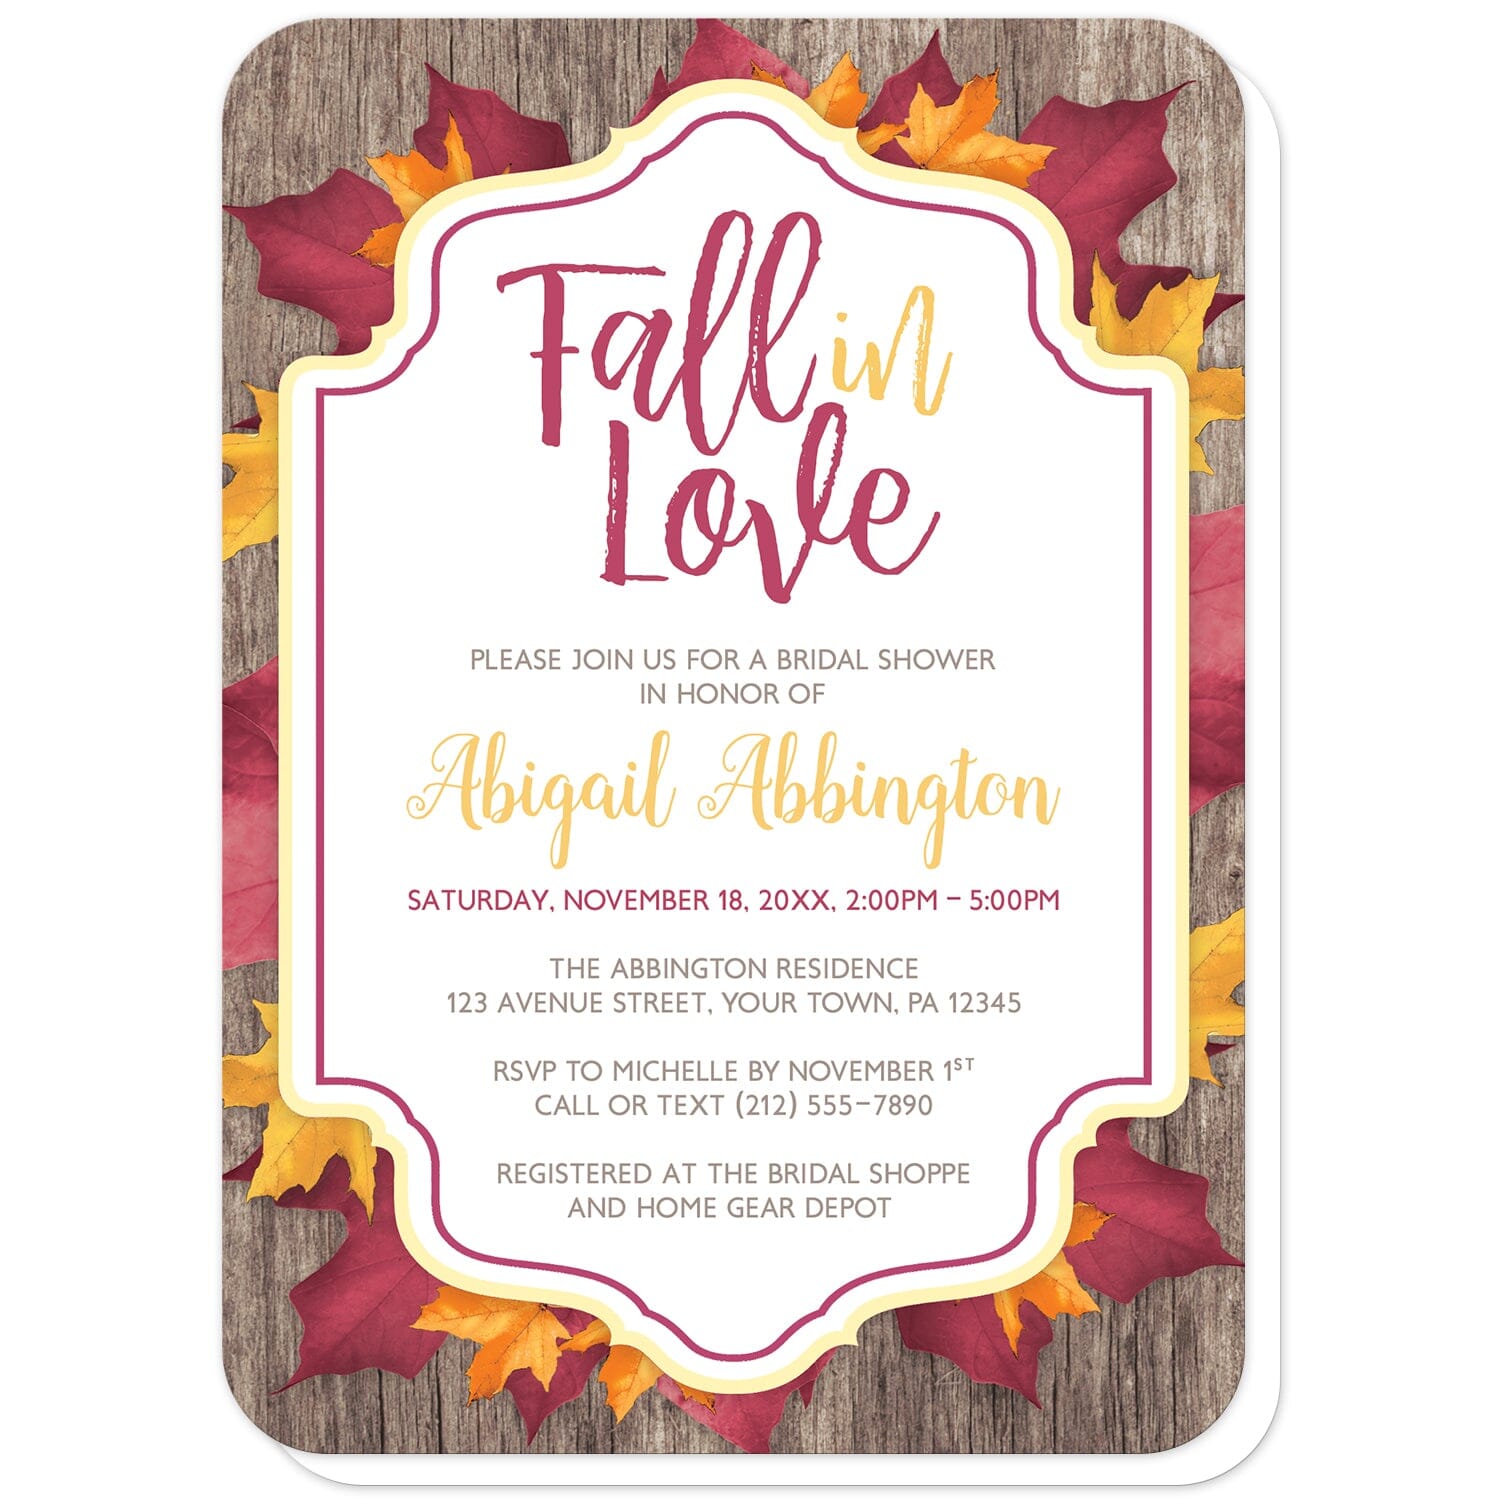 Rustic Burgundy Gold Fall in Love Bridal Shower Invitations (with rounded corners) at Artistically Invited. Beautiful rustic burgundy gold Fall in Love bridal shower invitations with burgundy and gold autumn leaves under a white frame area outlined in burgundy and gold on a rustic wood background. Your personalized bridal shower celebration details are custom printed in burgundy, gold, and light brown in the center on white. 